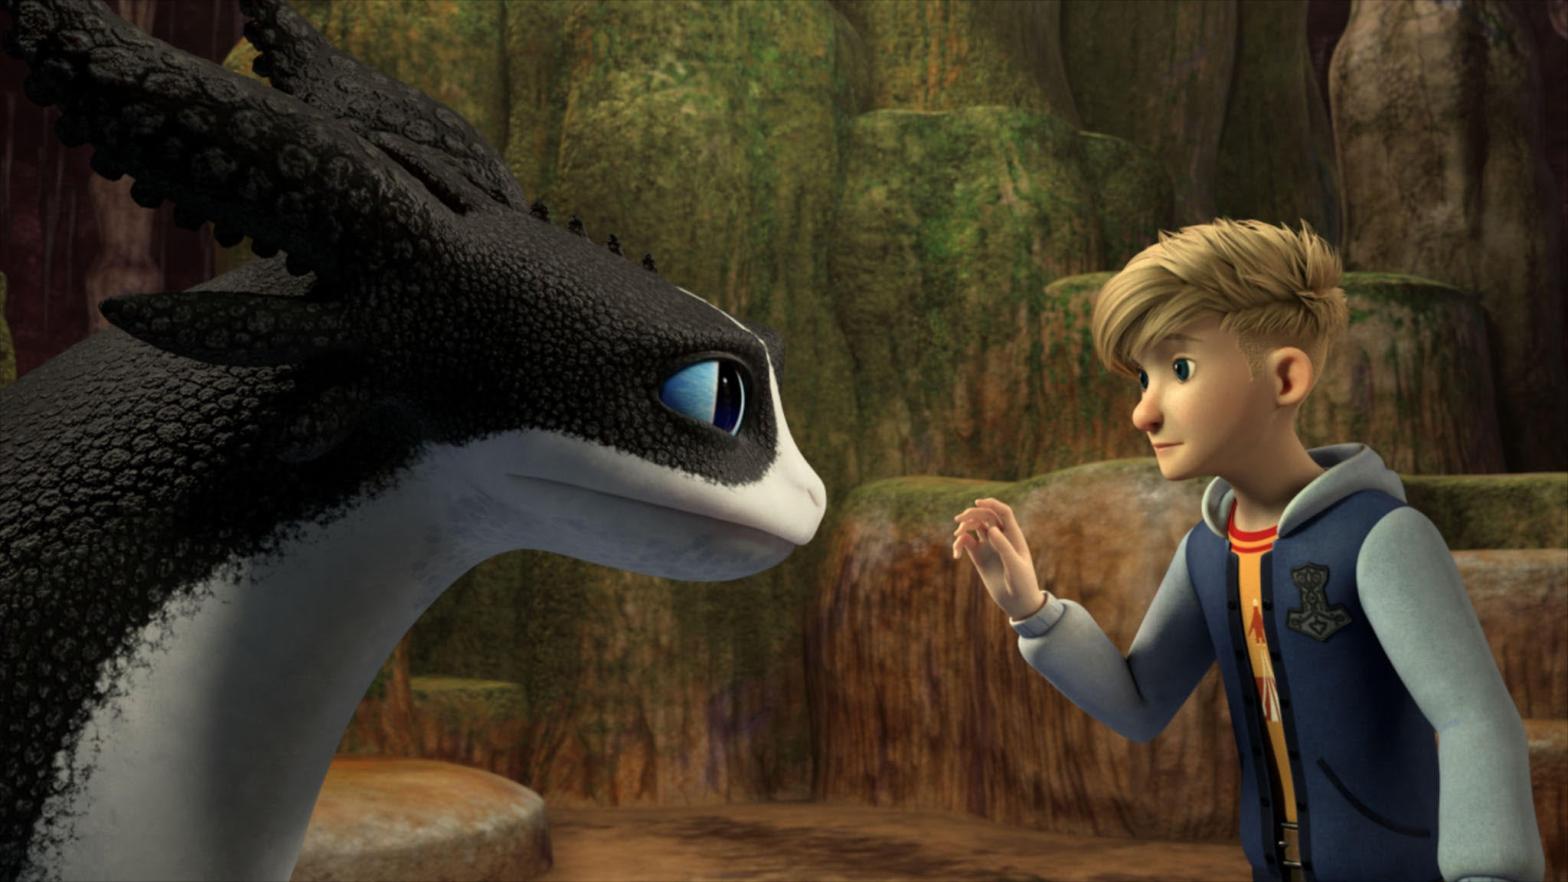 That kid looks shockingly unimpressed he's about to touch a dragon. (Image: Dreamworks Animation)